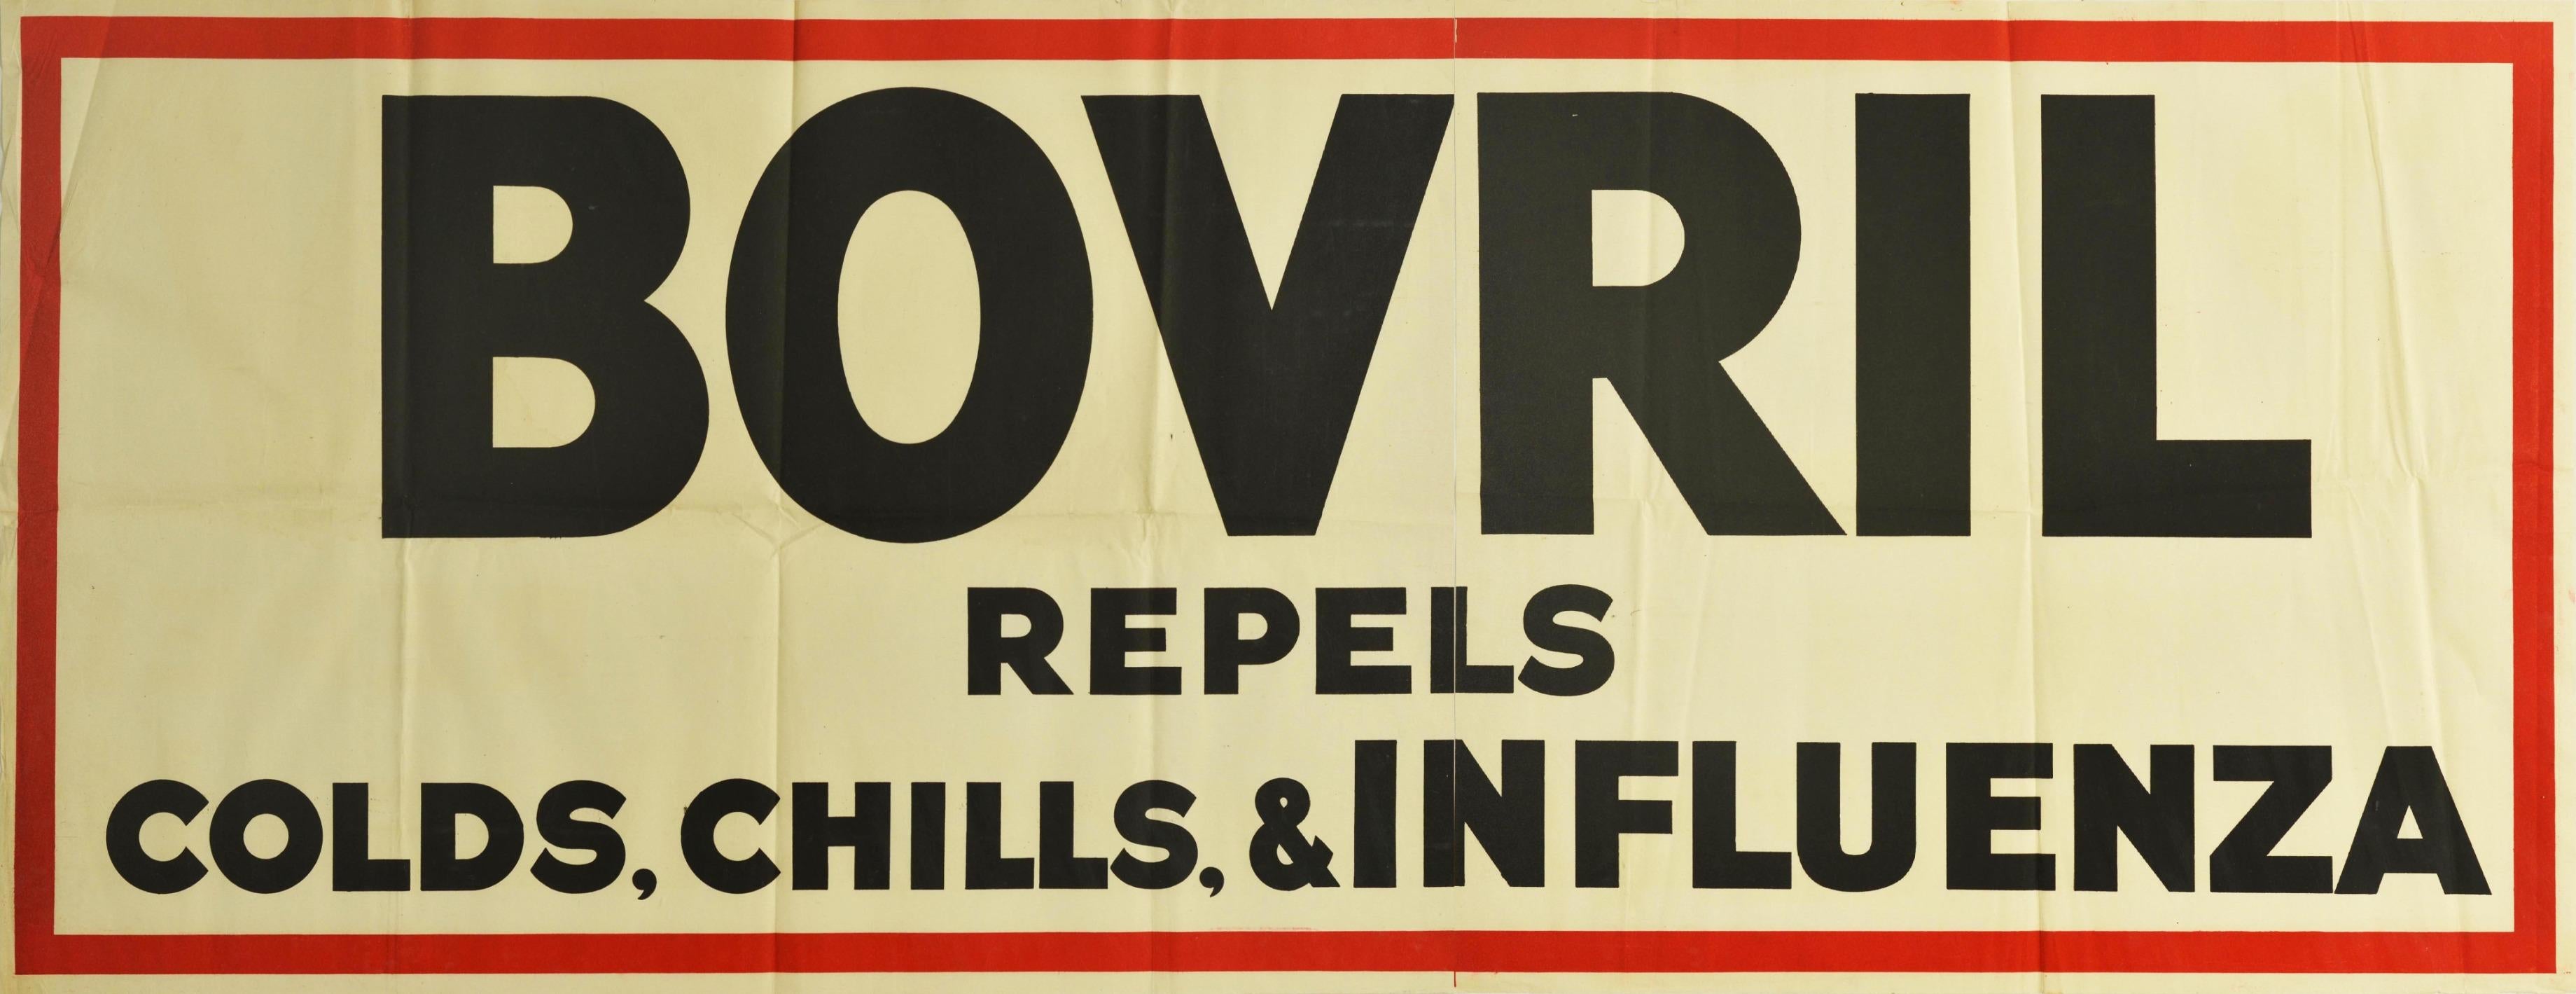 Original vintage food advertising poster for Bovril - Bovril repels colds, chills, & influenza - featuring bold black lettering on a white background in a thick red frame border. Printed in Britain in the 1930s, this campaign used puns and word play